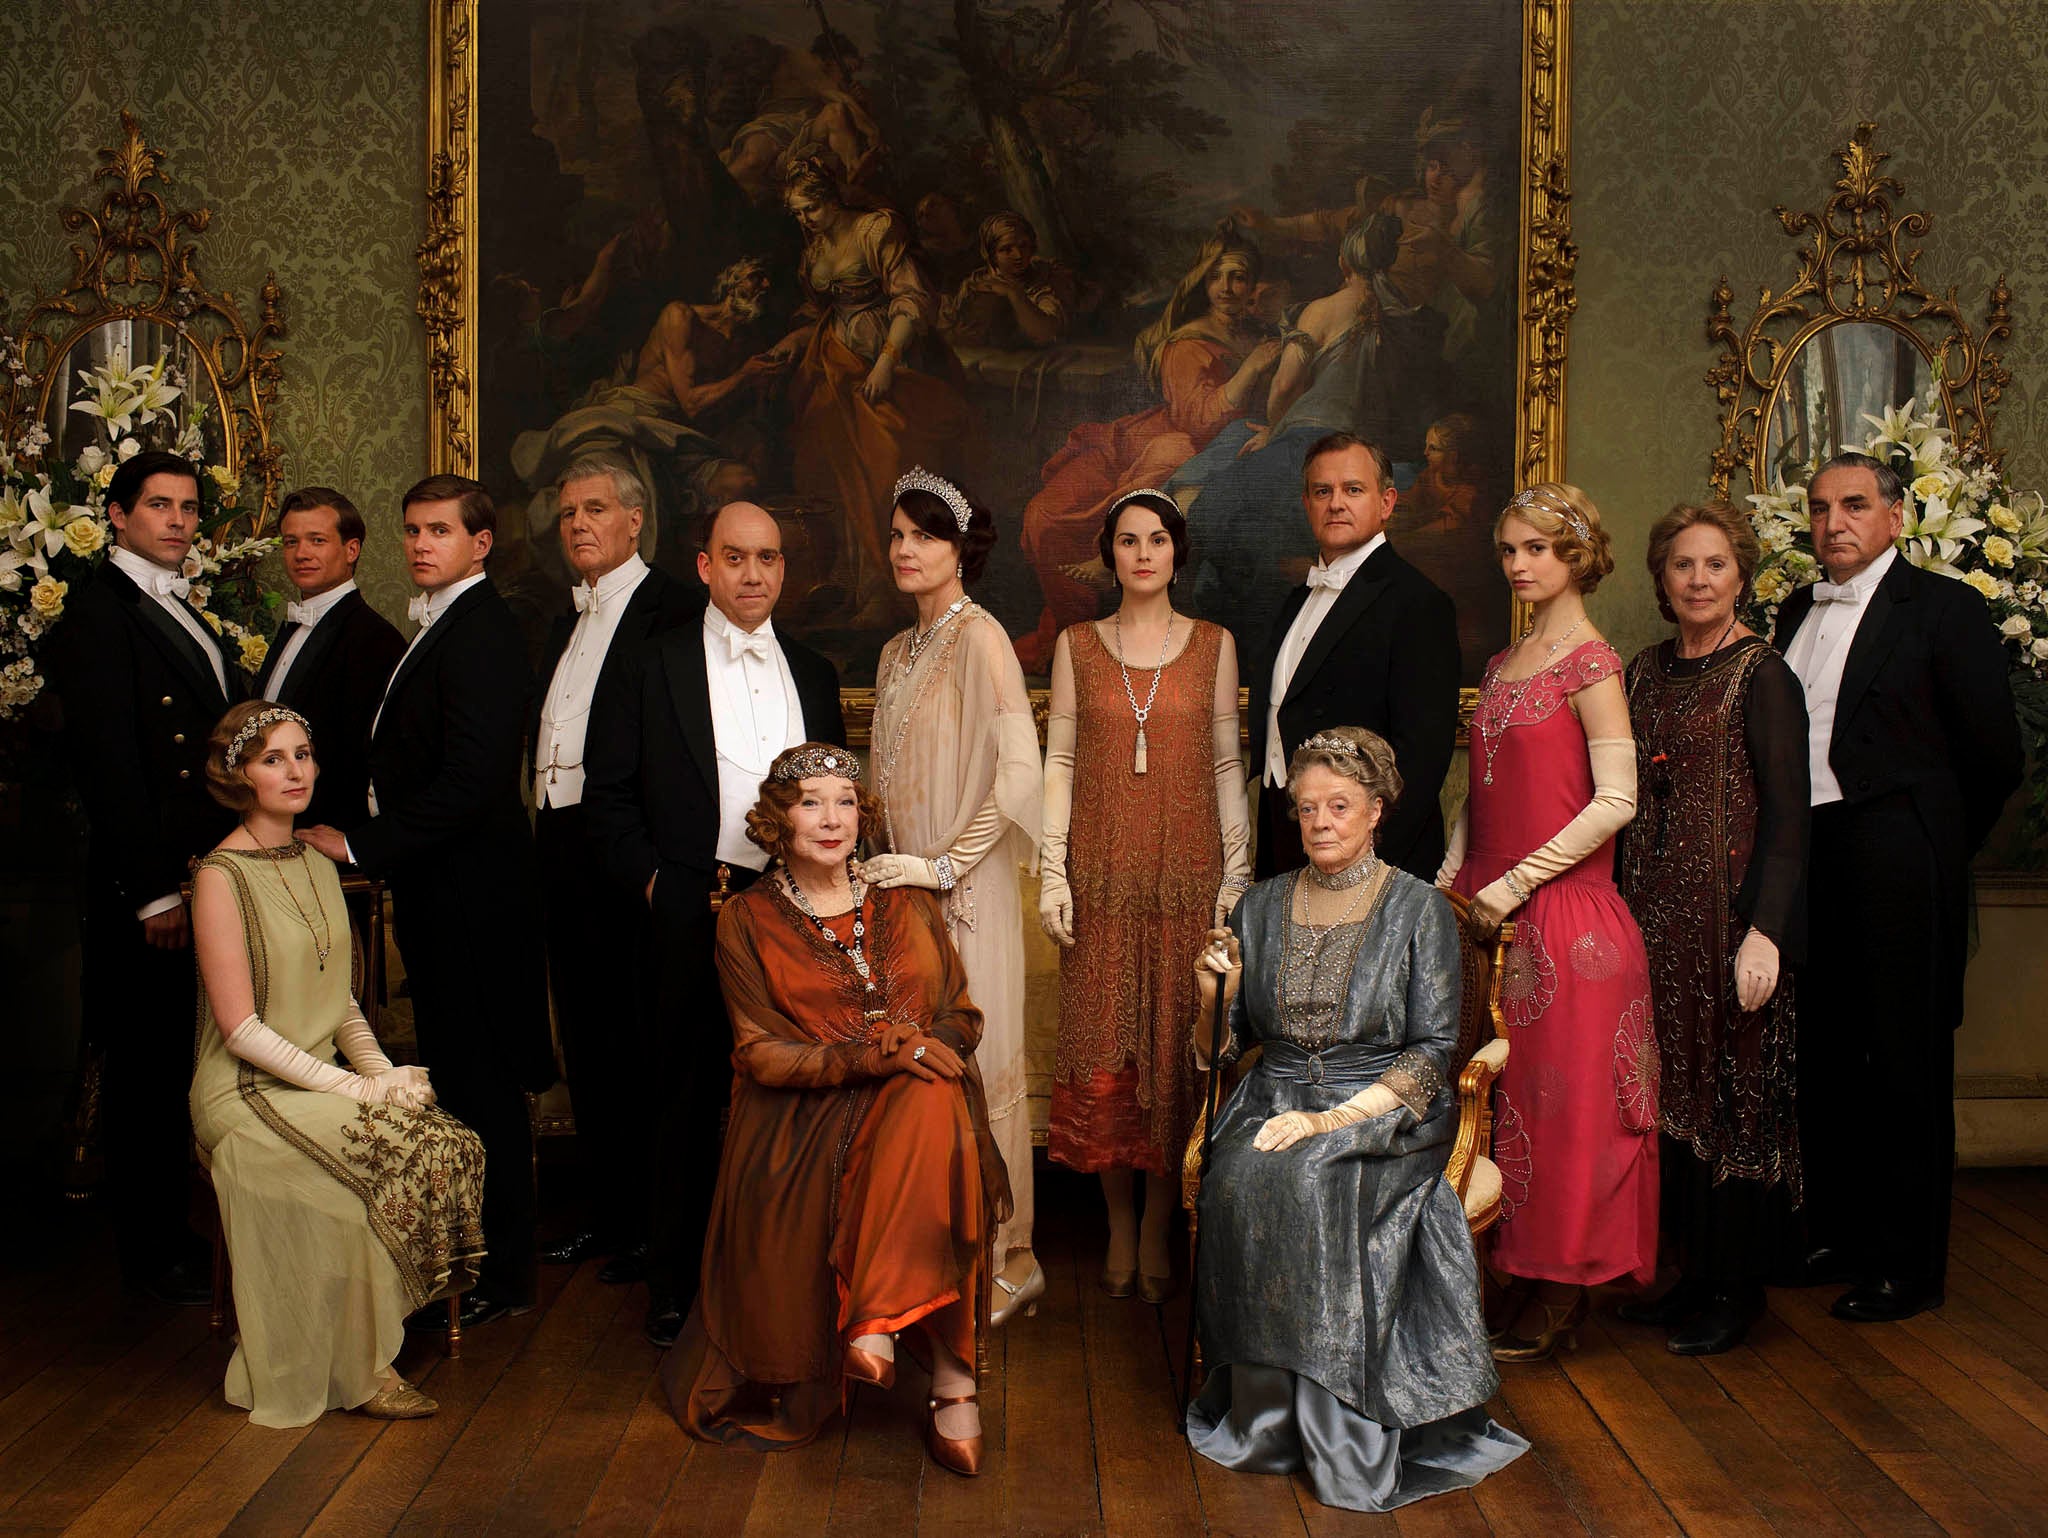 The cast of Julian Fellowes' small screen hit Downton Abbey